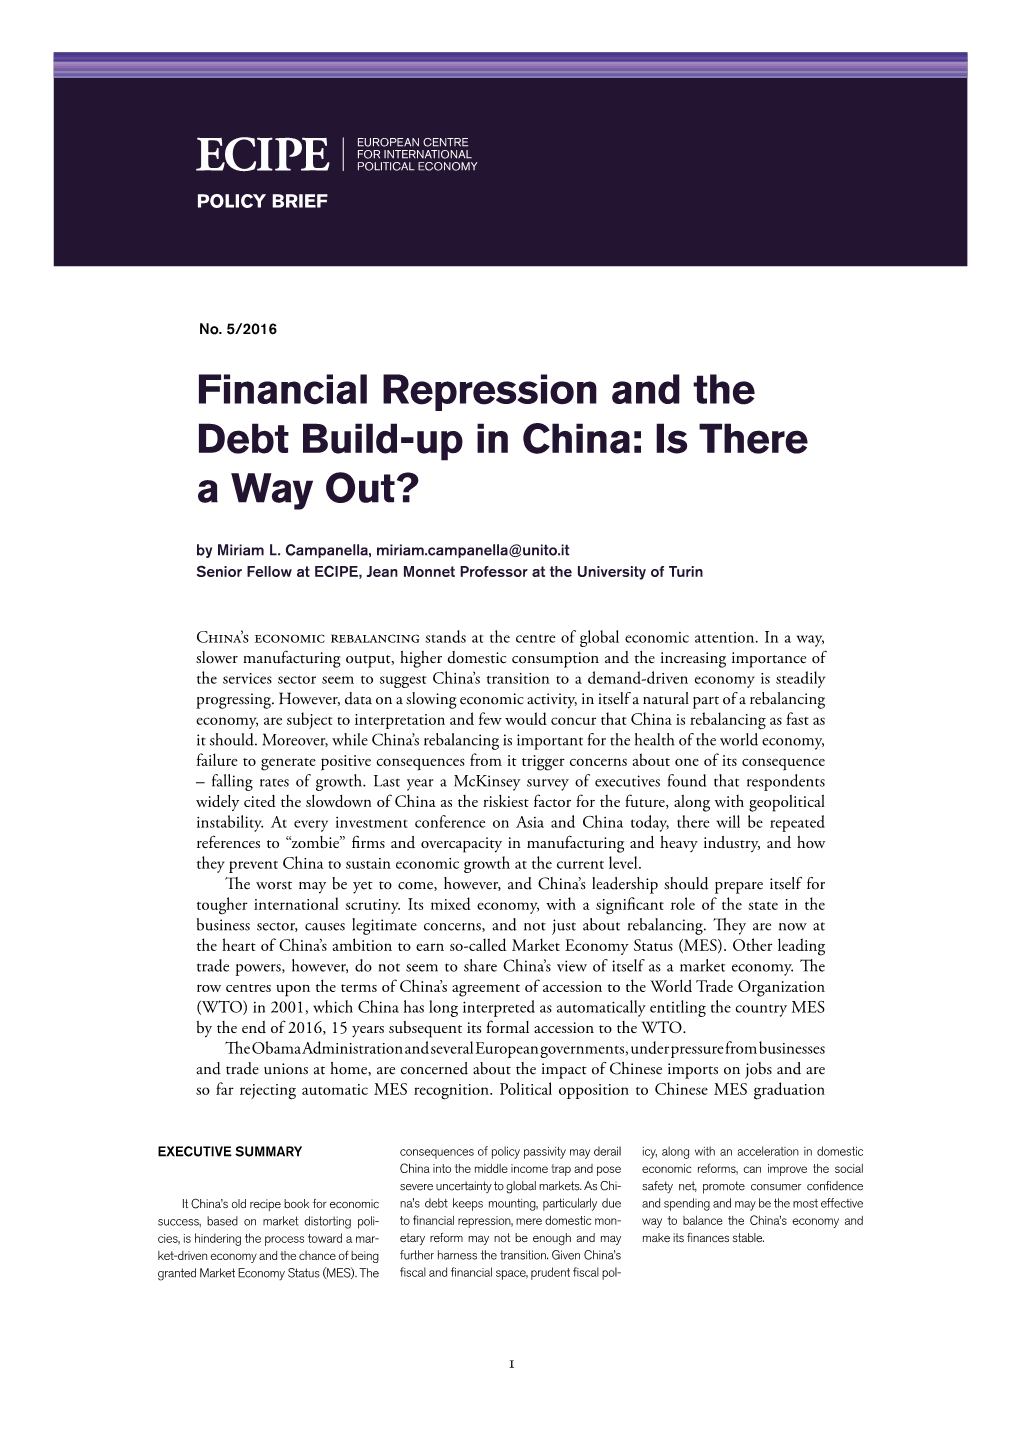 Financial Repression and the Debt Build-Up in China: Is There a Way Out?